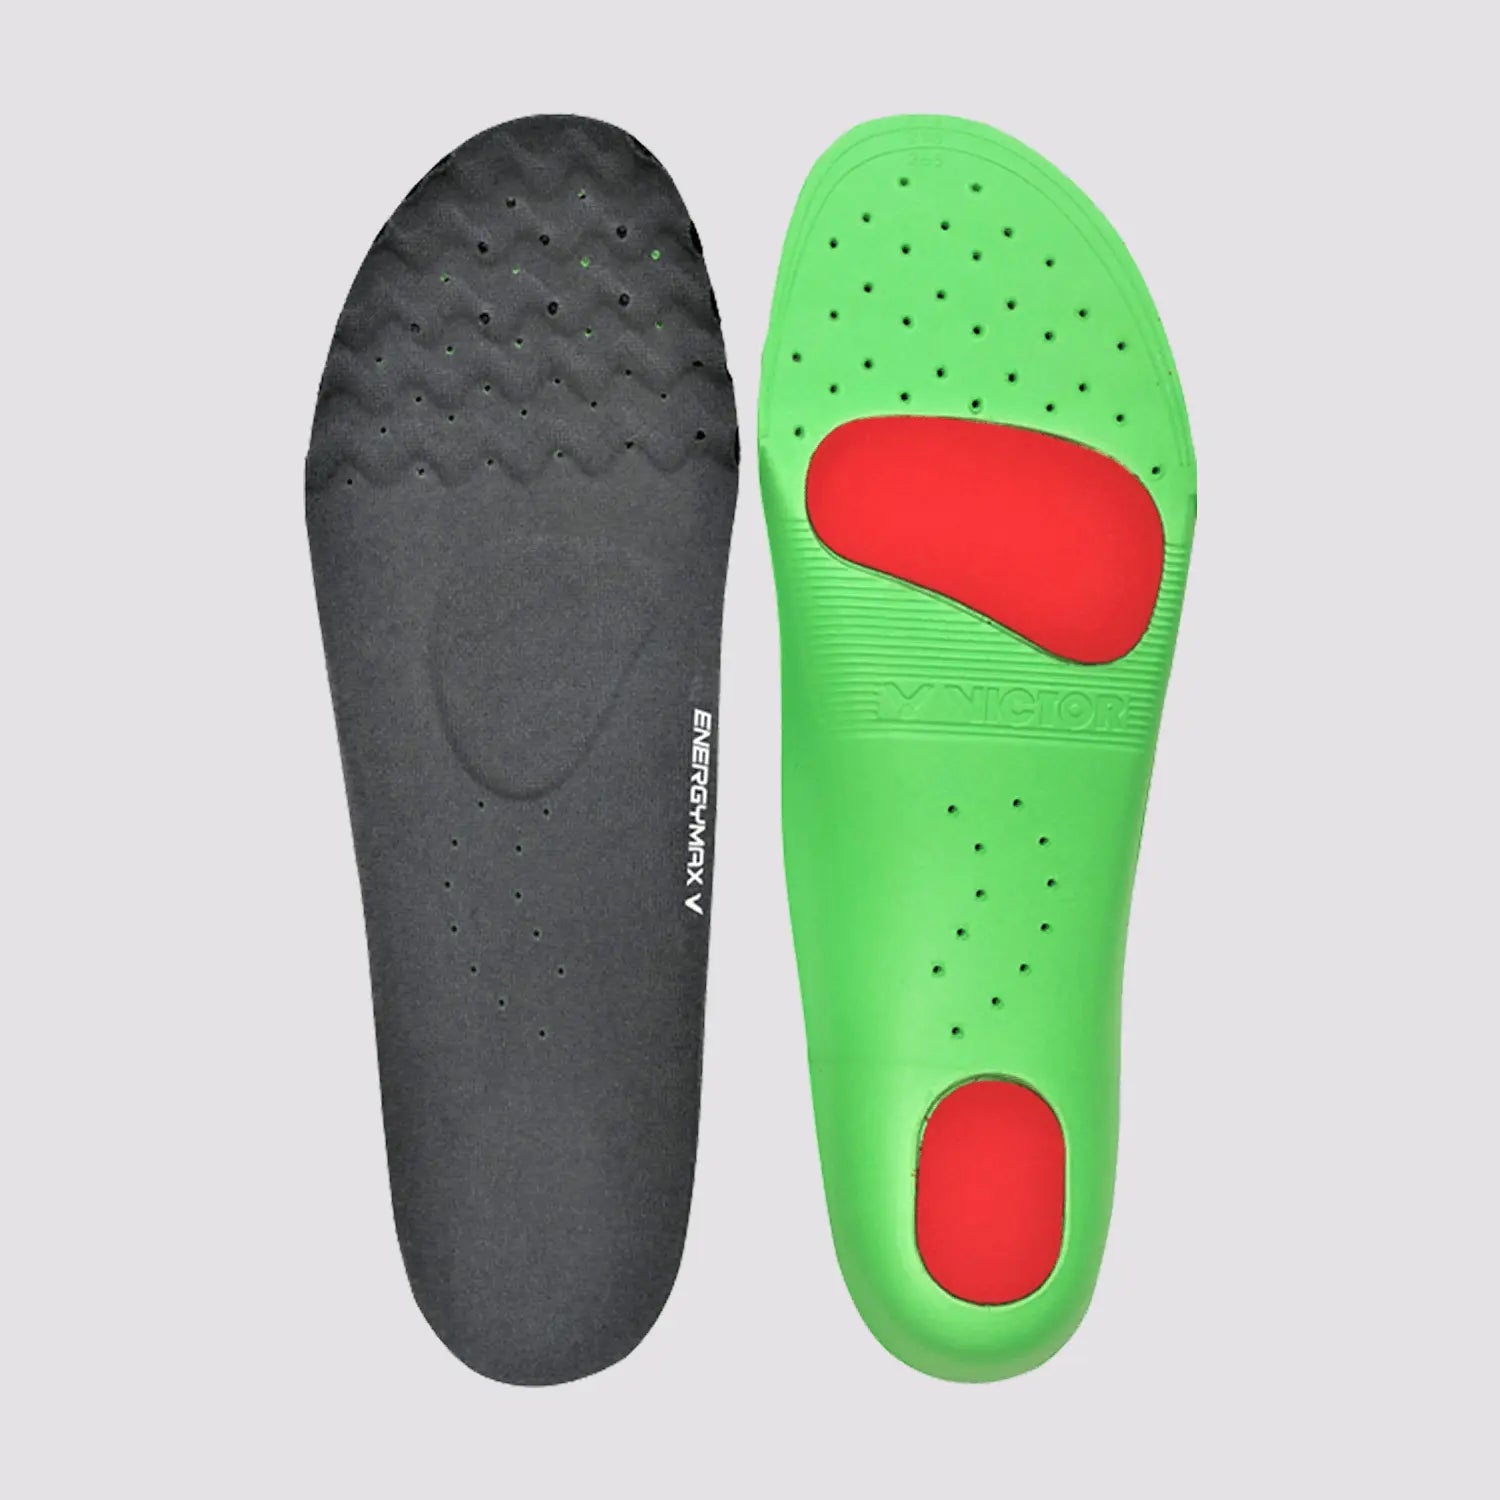 VT-XD11 H Badminton Shoe Insole (Comfortable,Shock-Absorbing,Stable Multi-Function Insole) High Arch